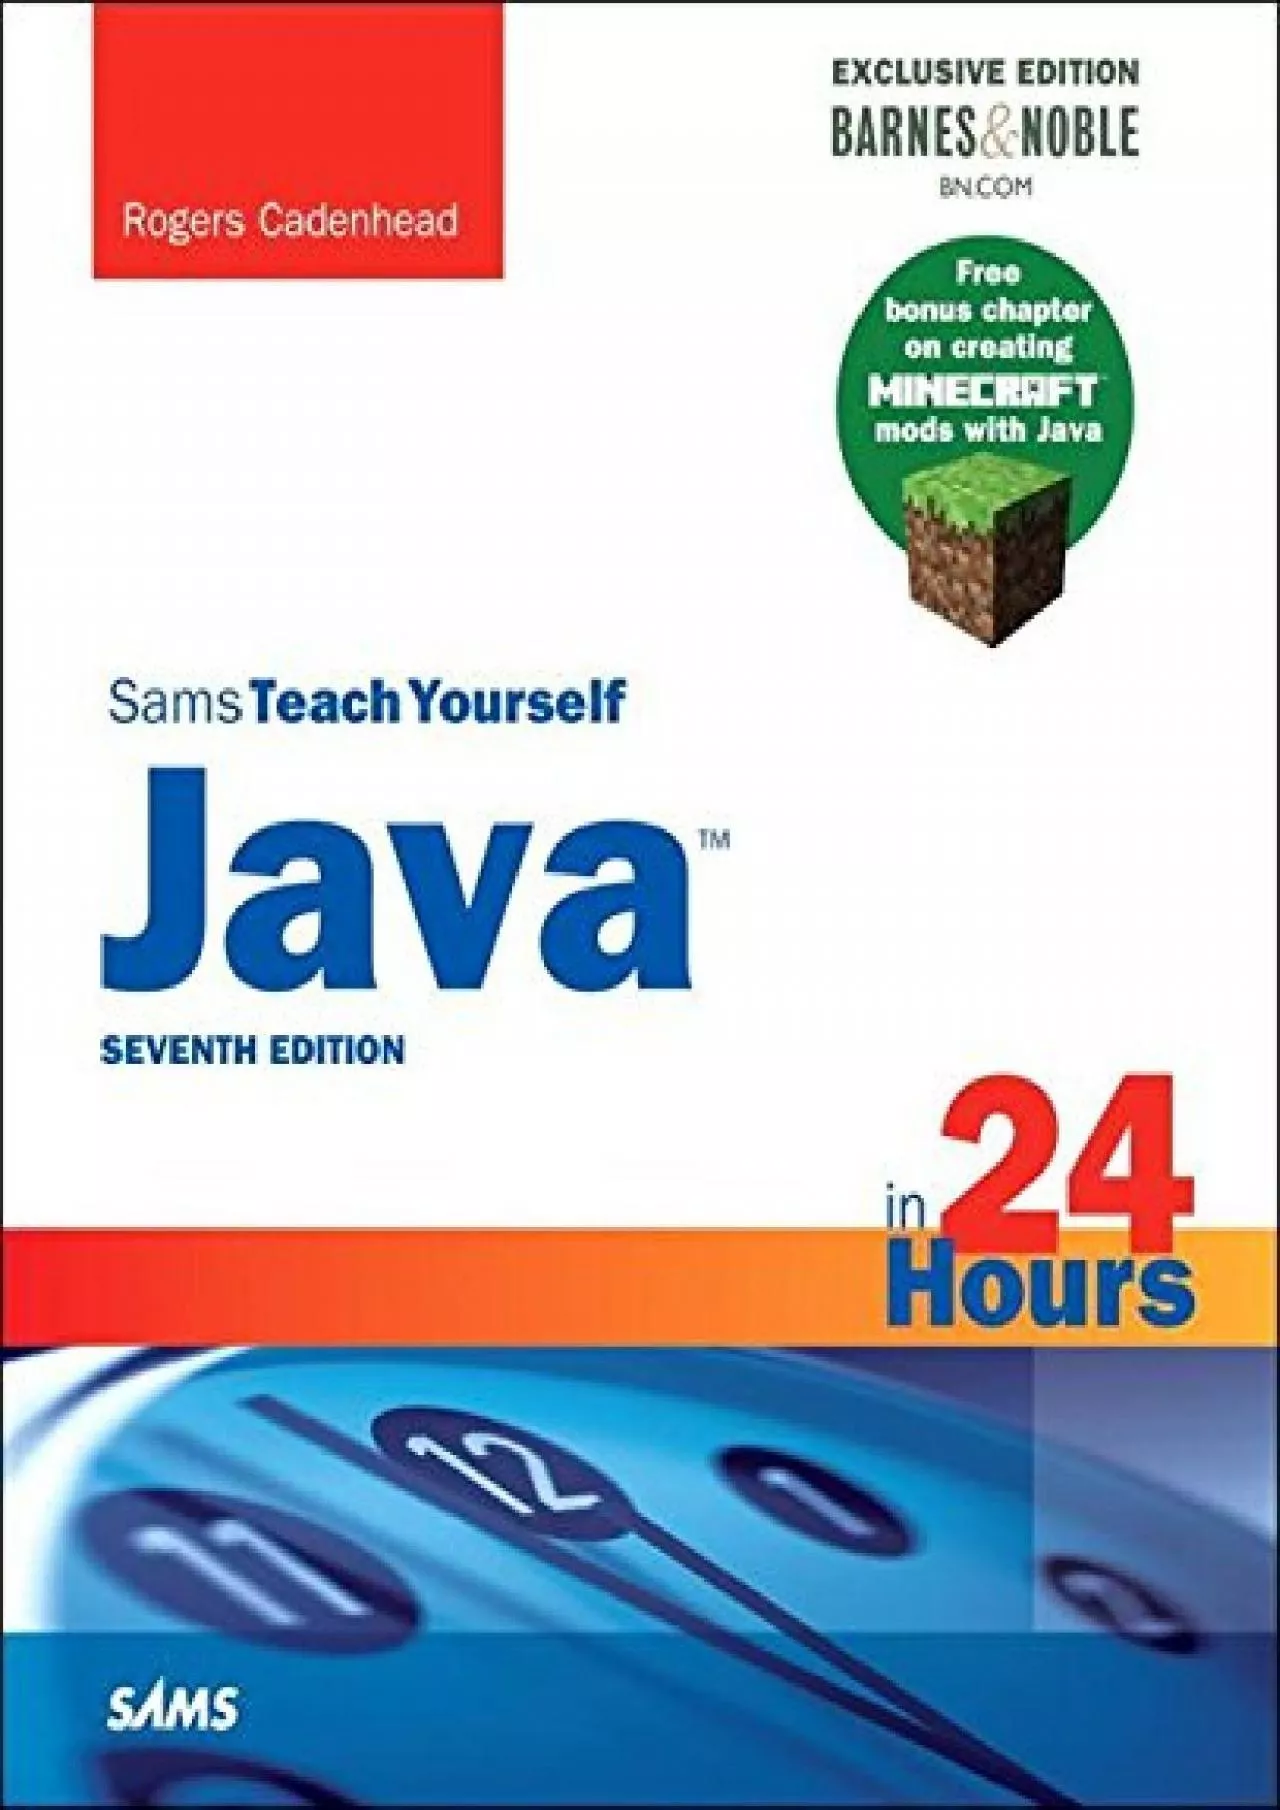 [DOWLOAD]-Java in 24 Hours, Sams Teach Yourself Covering Java 8, Barnes  Noble Exclusive